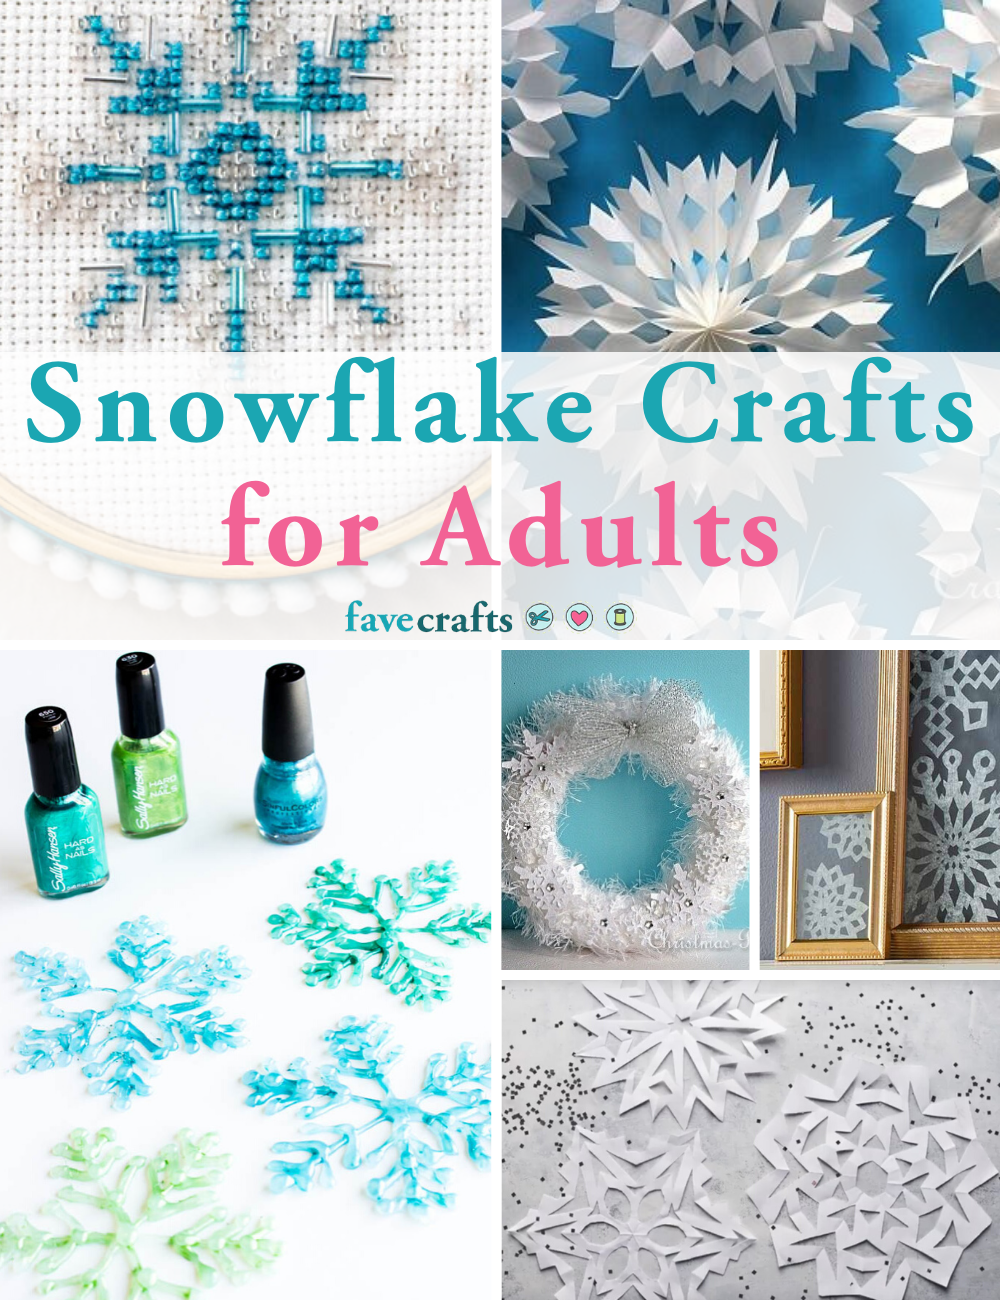 https://irepo.primecp.com/2019/10/426511/Snowflake-Crafts-for-Adults_ExtraLarge1000_ID-3413653.png?v=3413653